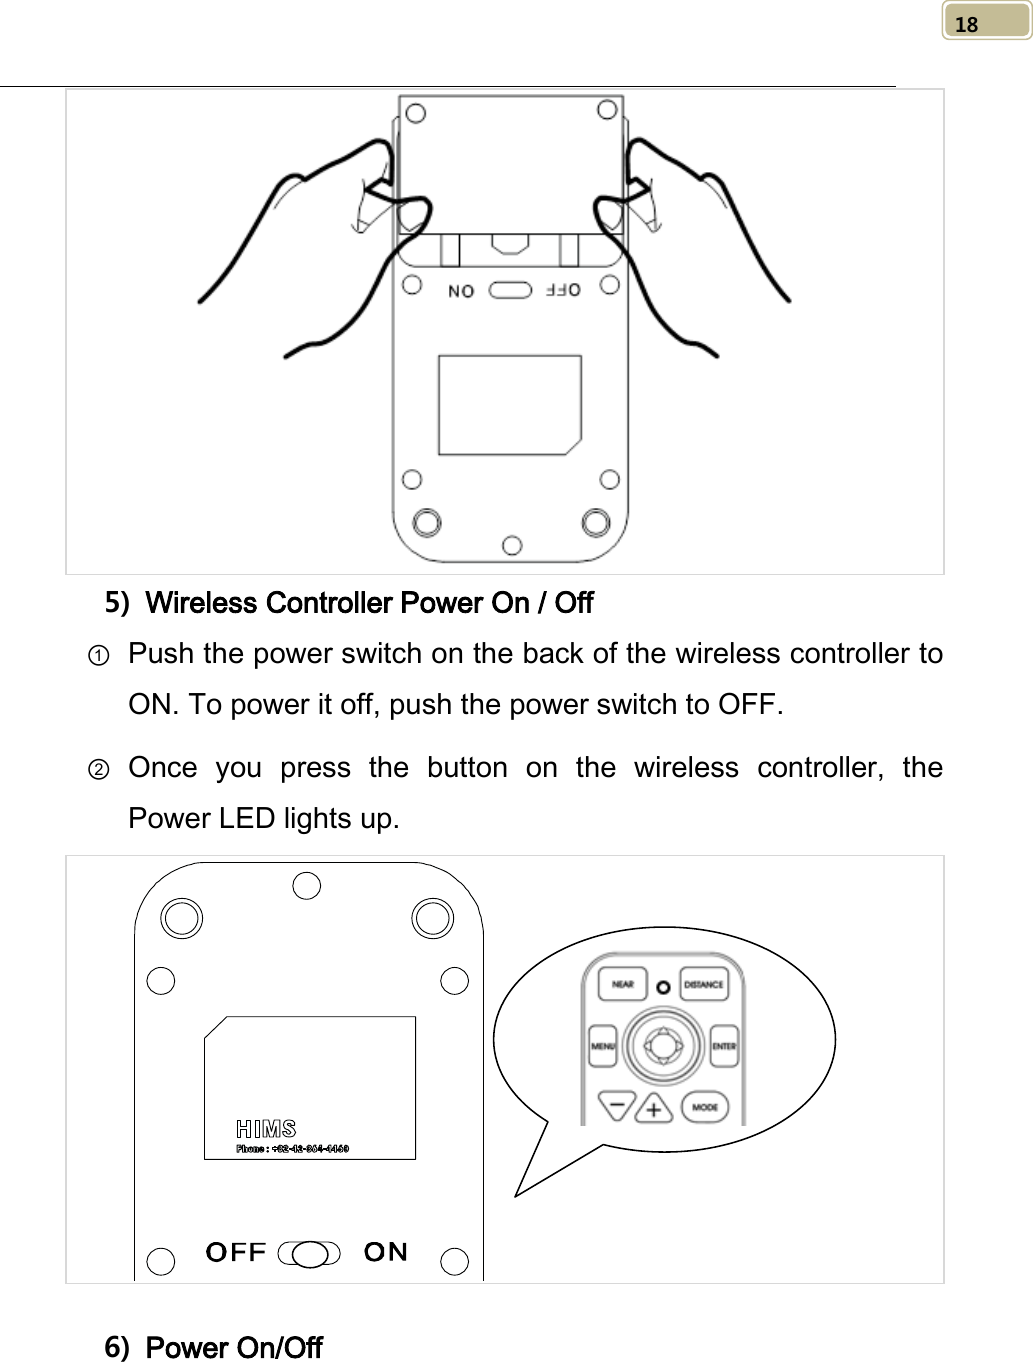   18  5) Wireless Controller Power On / Off   ① Push the power switch on the back of the wireless controller to ON. To power it off, push the power switch to OFF. ② Once  you press the button on the wireless  controller, the Power LED lights up.   6) Power On/Off    